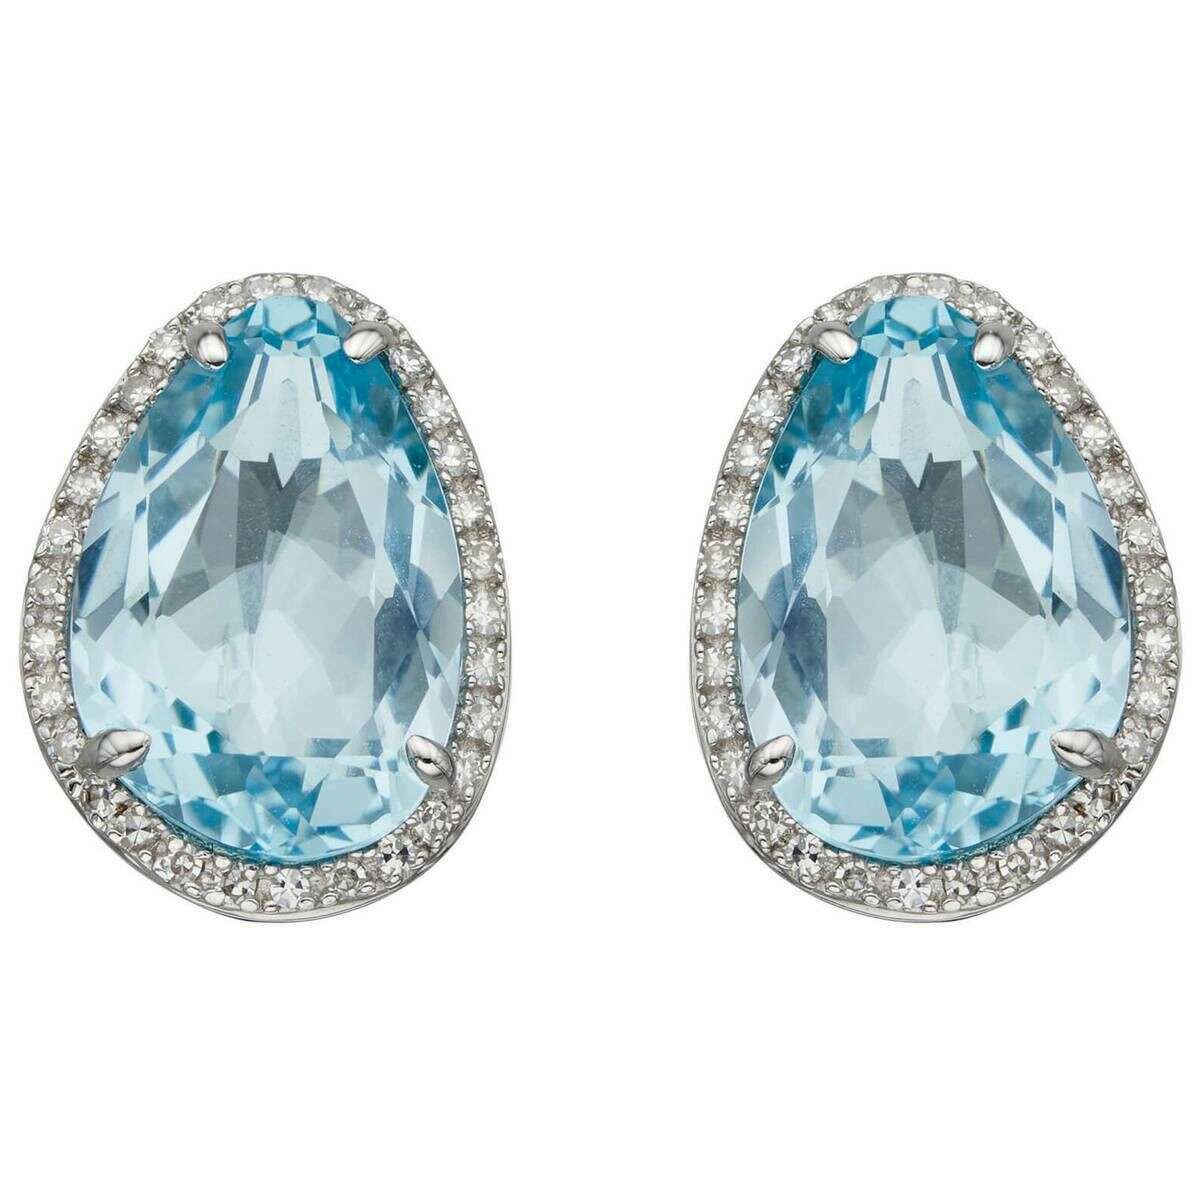 Elements Gold Irregular-Shaped Topaz and Diamond Earrings - Blue/Silver